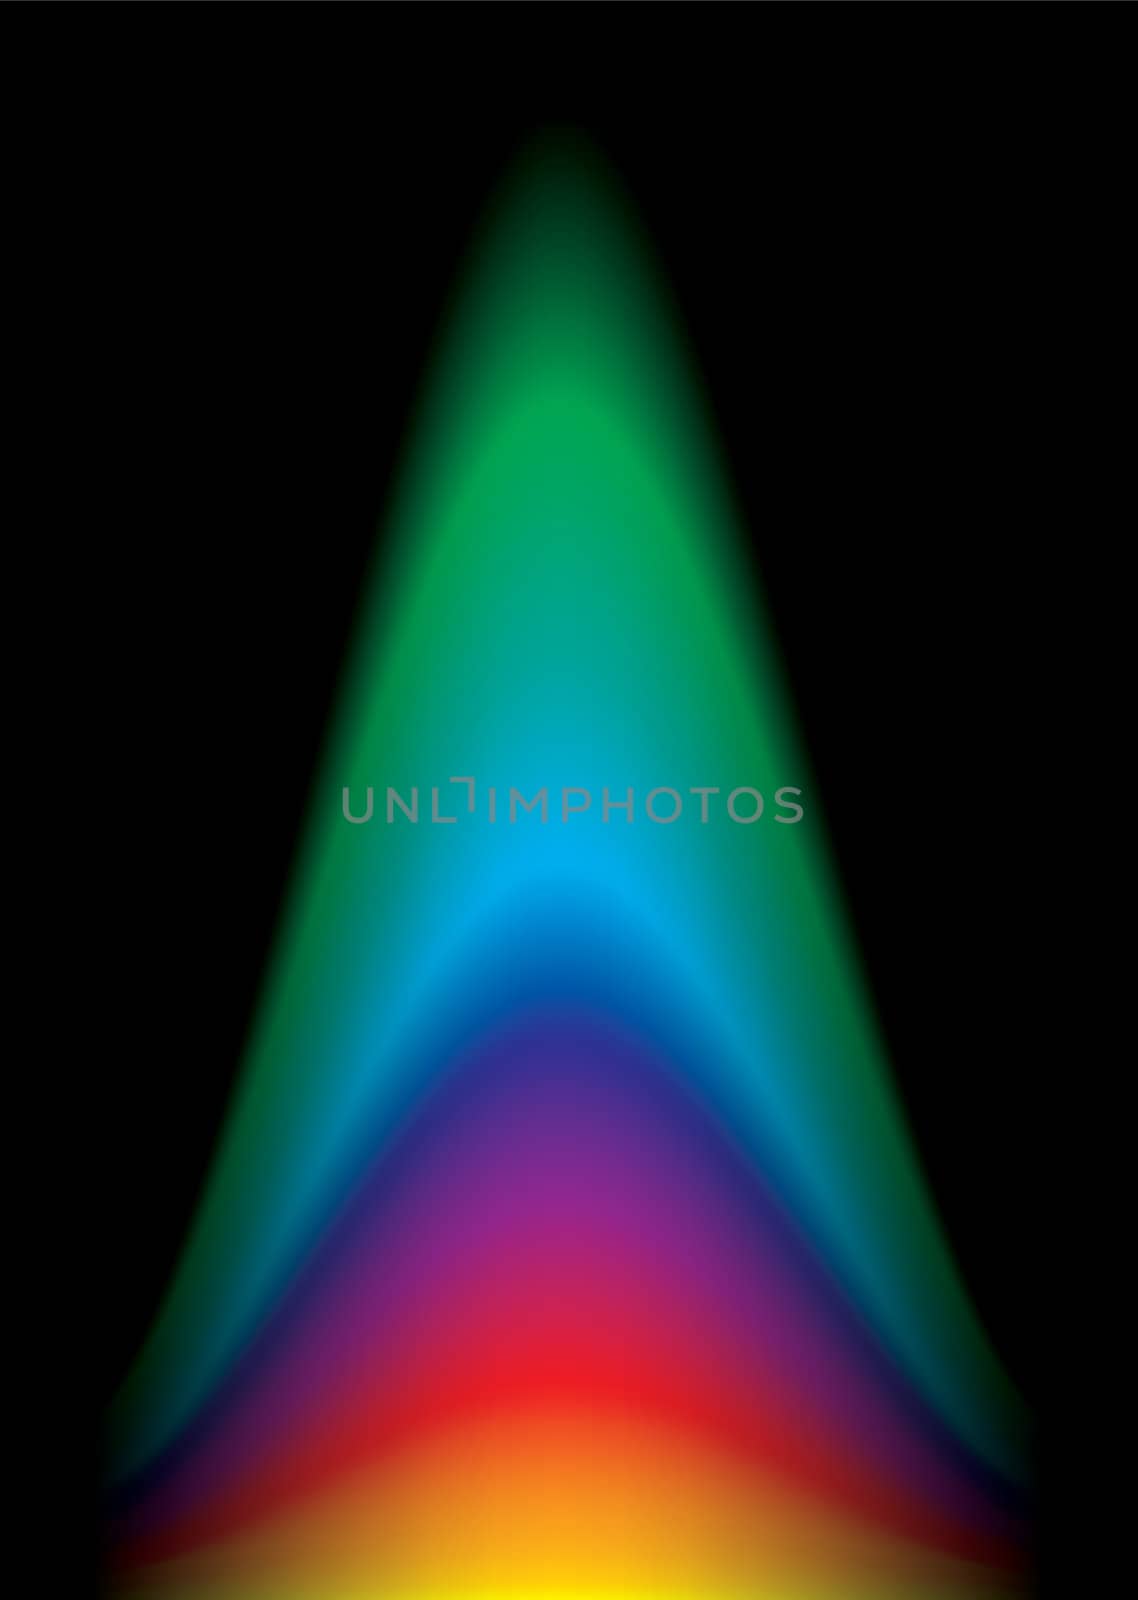 Brightly colored abstract rainbow flame black background